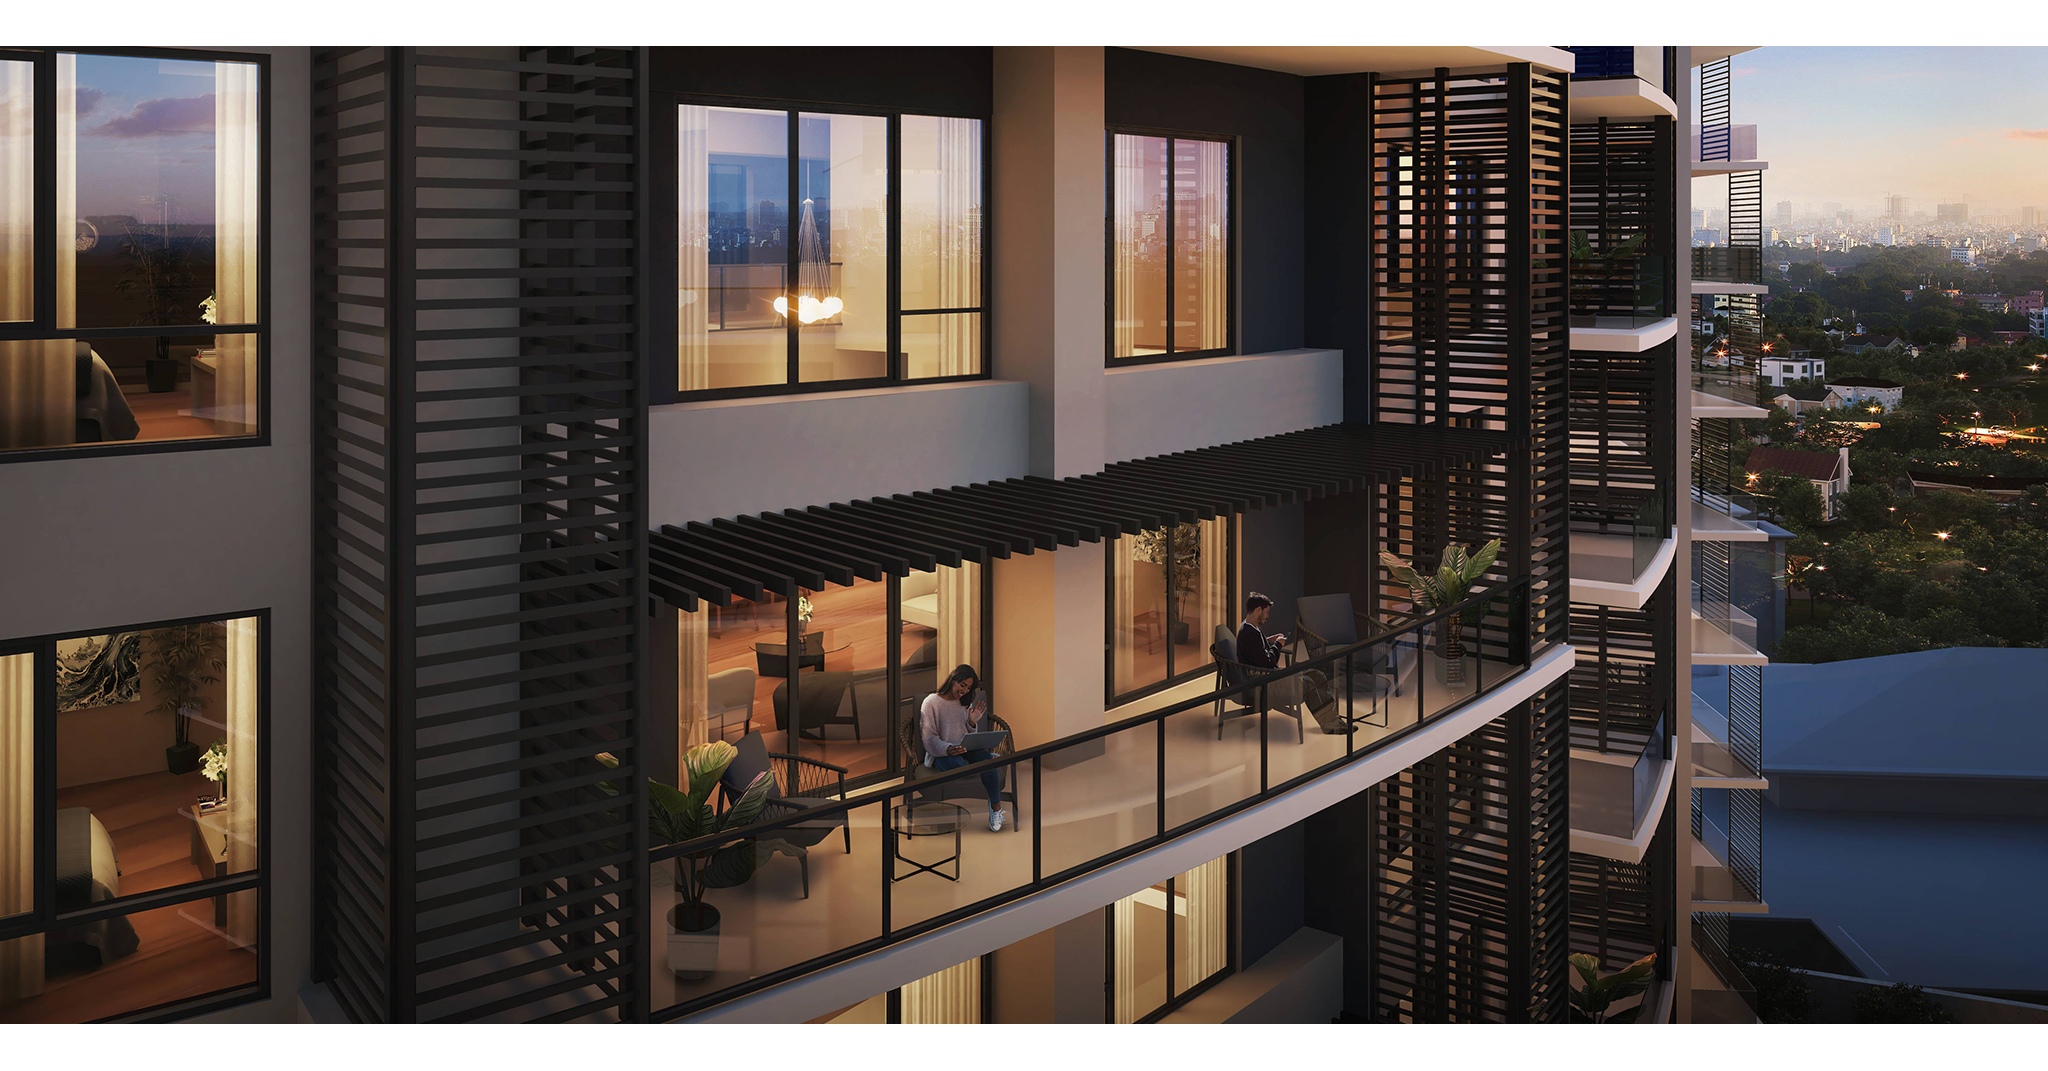 Two Botanika Nature Residences: Where nature-centric living and city life meet in the Metro South